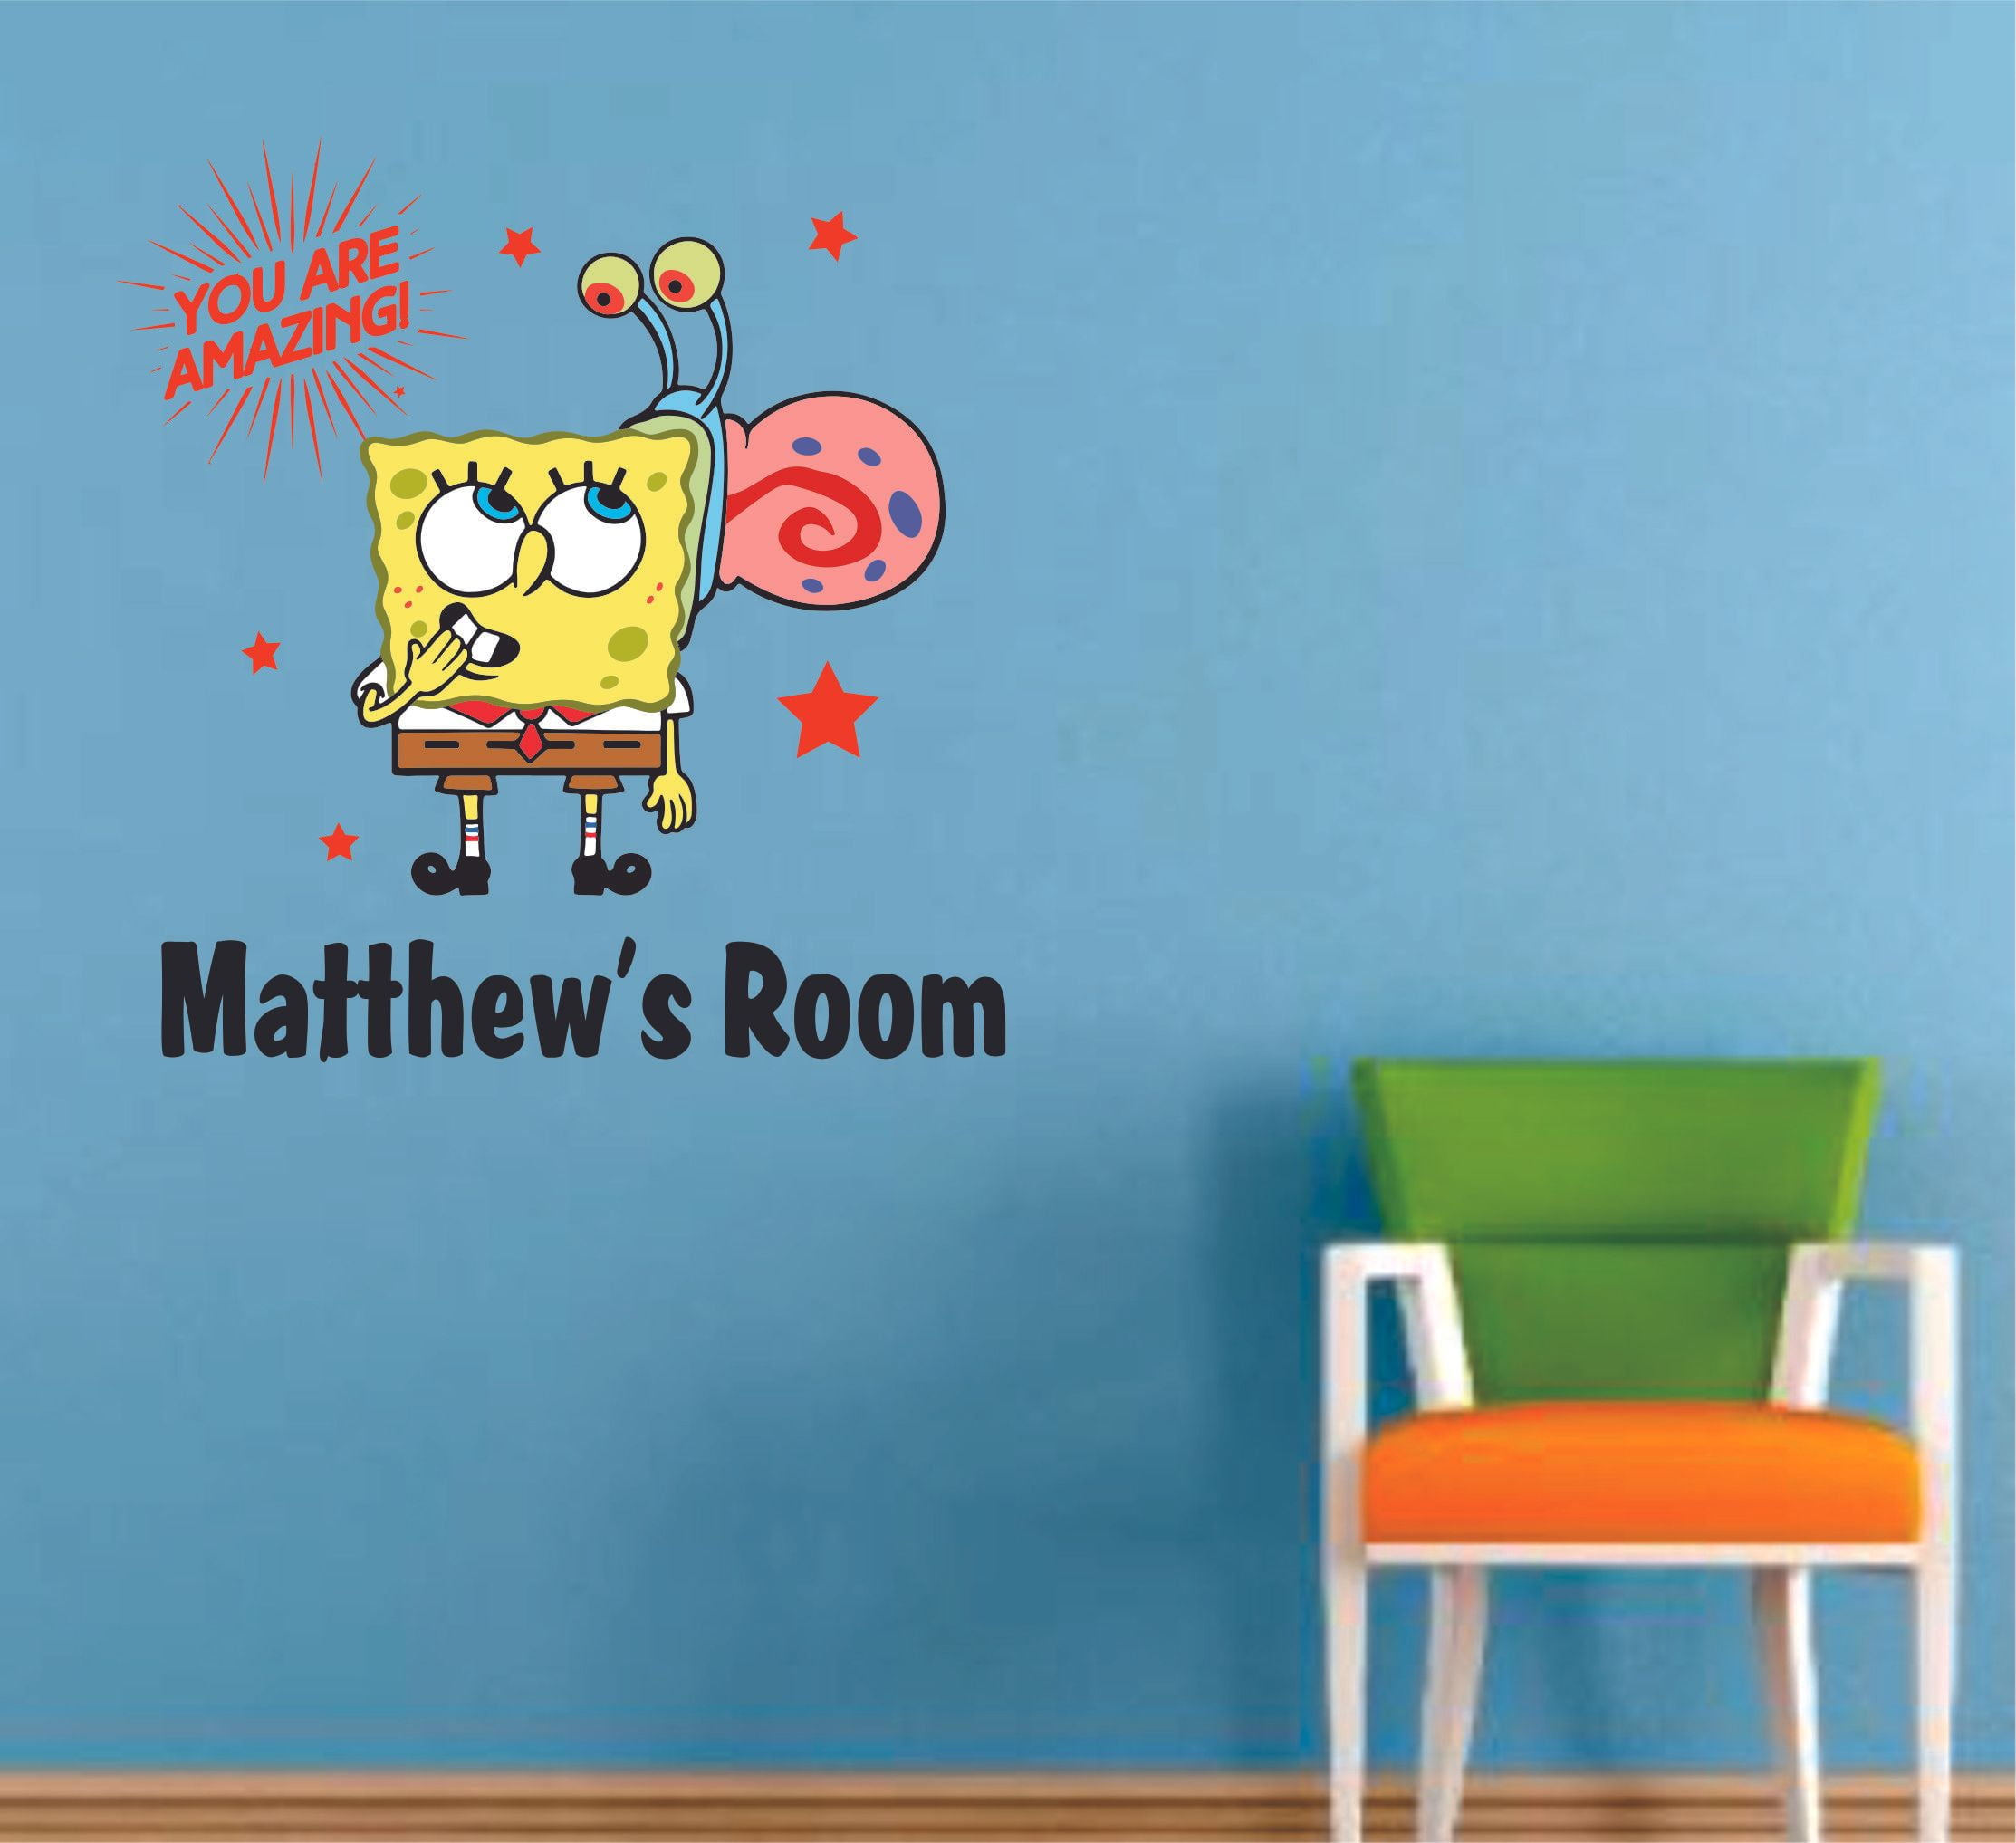 Personalized Name Wall Sticker Boys Girls Name Decal Kids Room Decoration Vinyl 